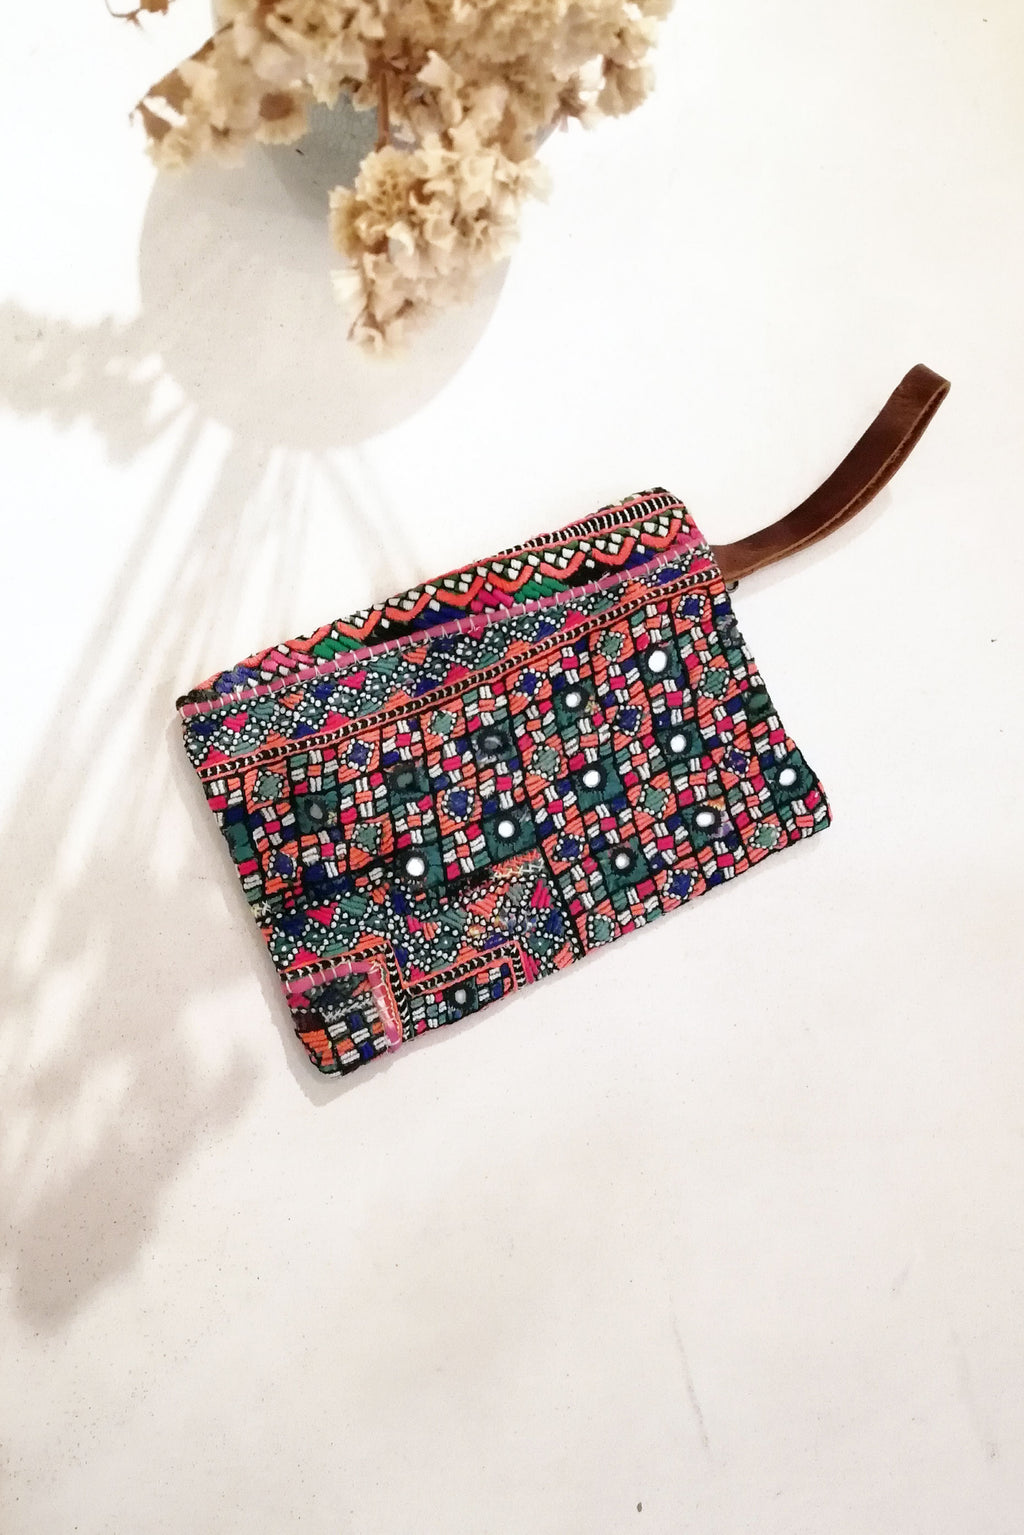 Vintage Embroidery and Brown Leather Clutch